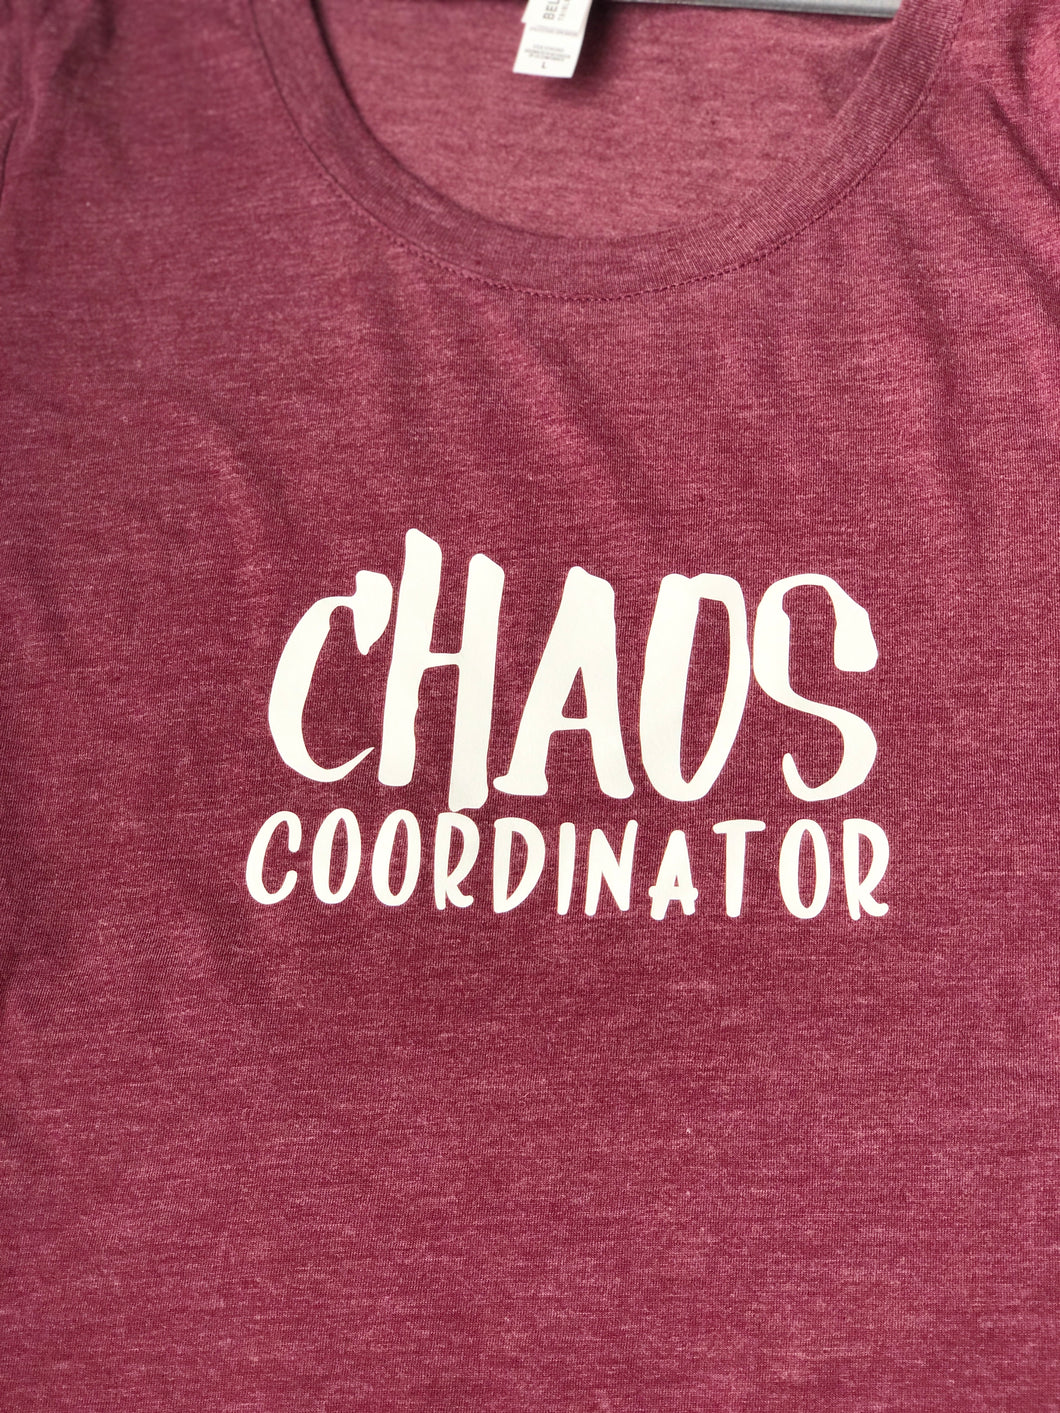 Adult - Chaos Coordinator - Clearance (Gray)